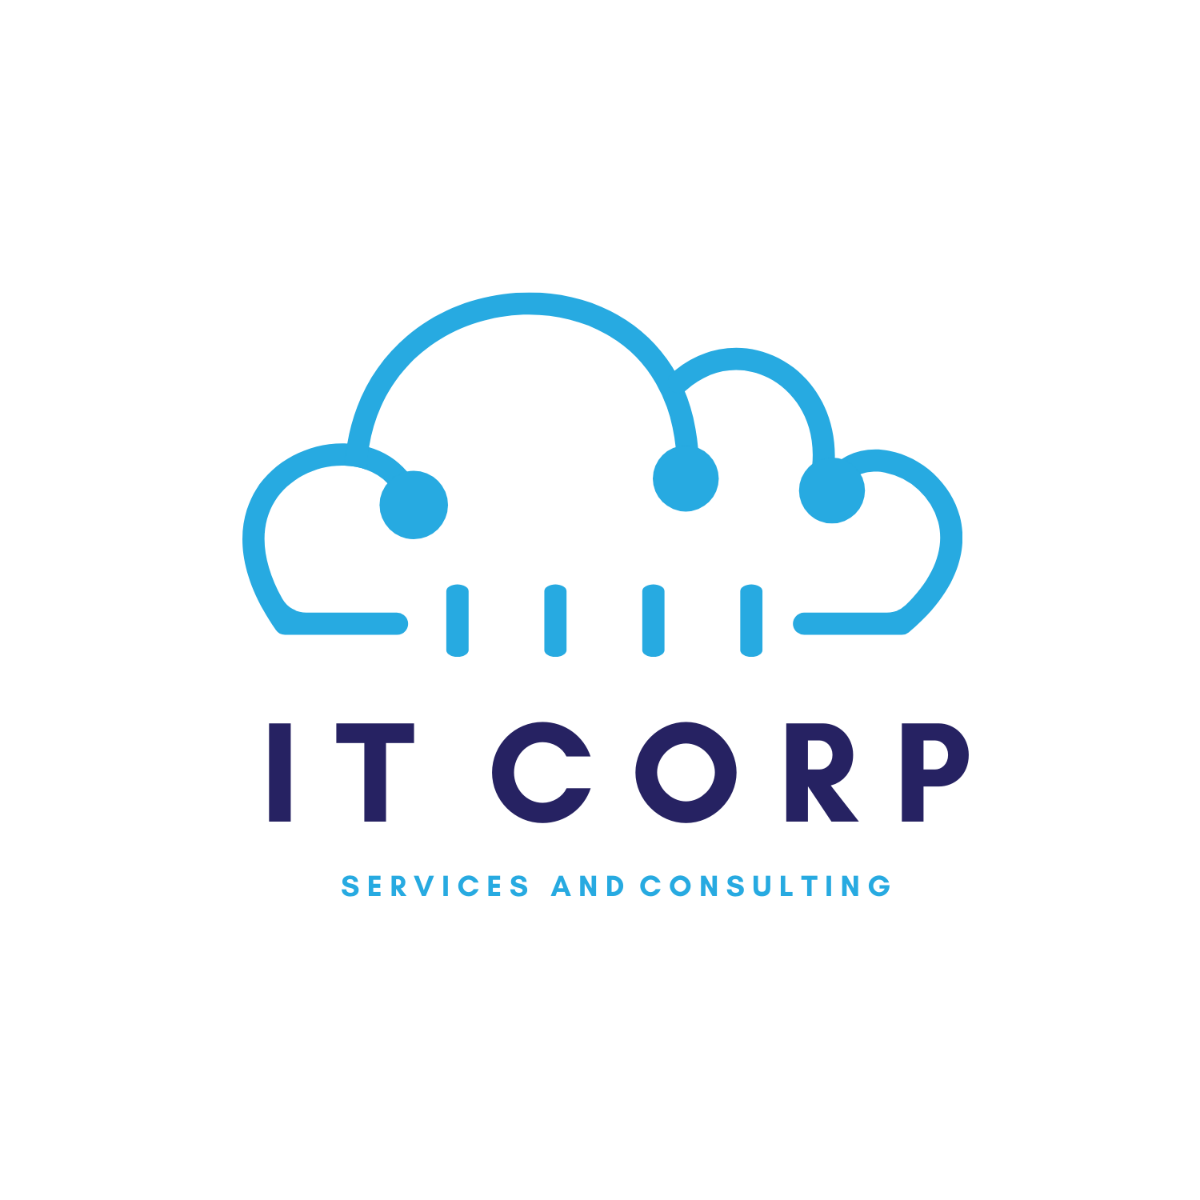 IT Cloud Consulting & Implementation Logo Template